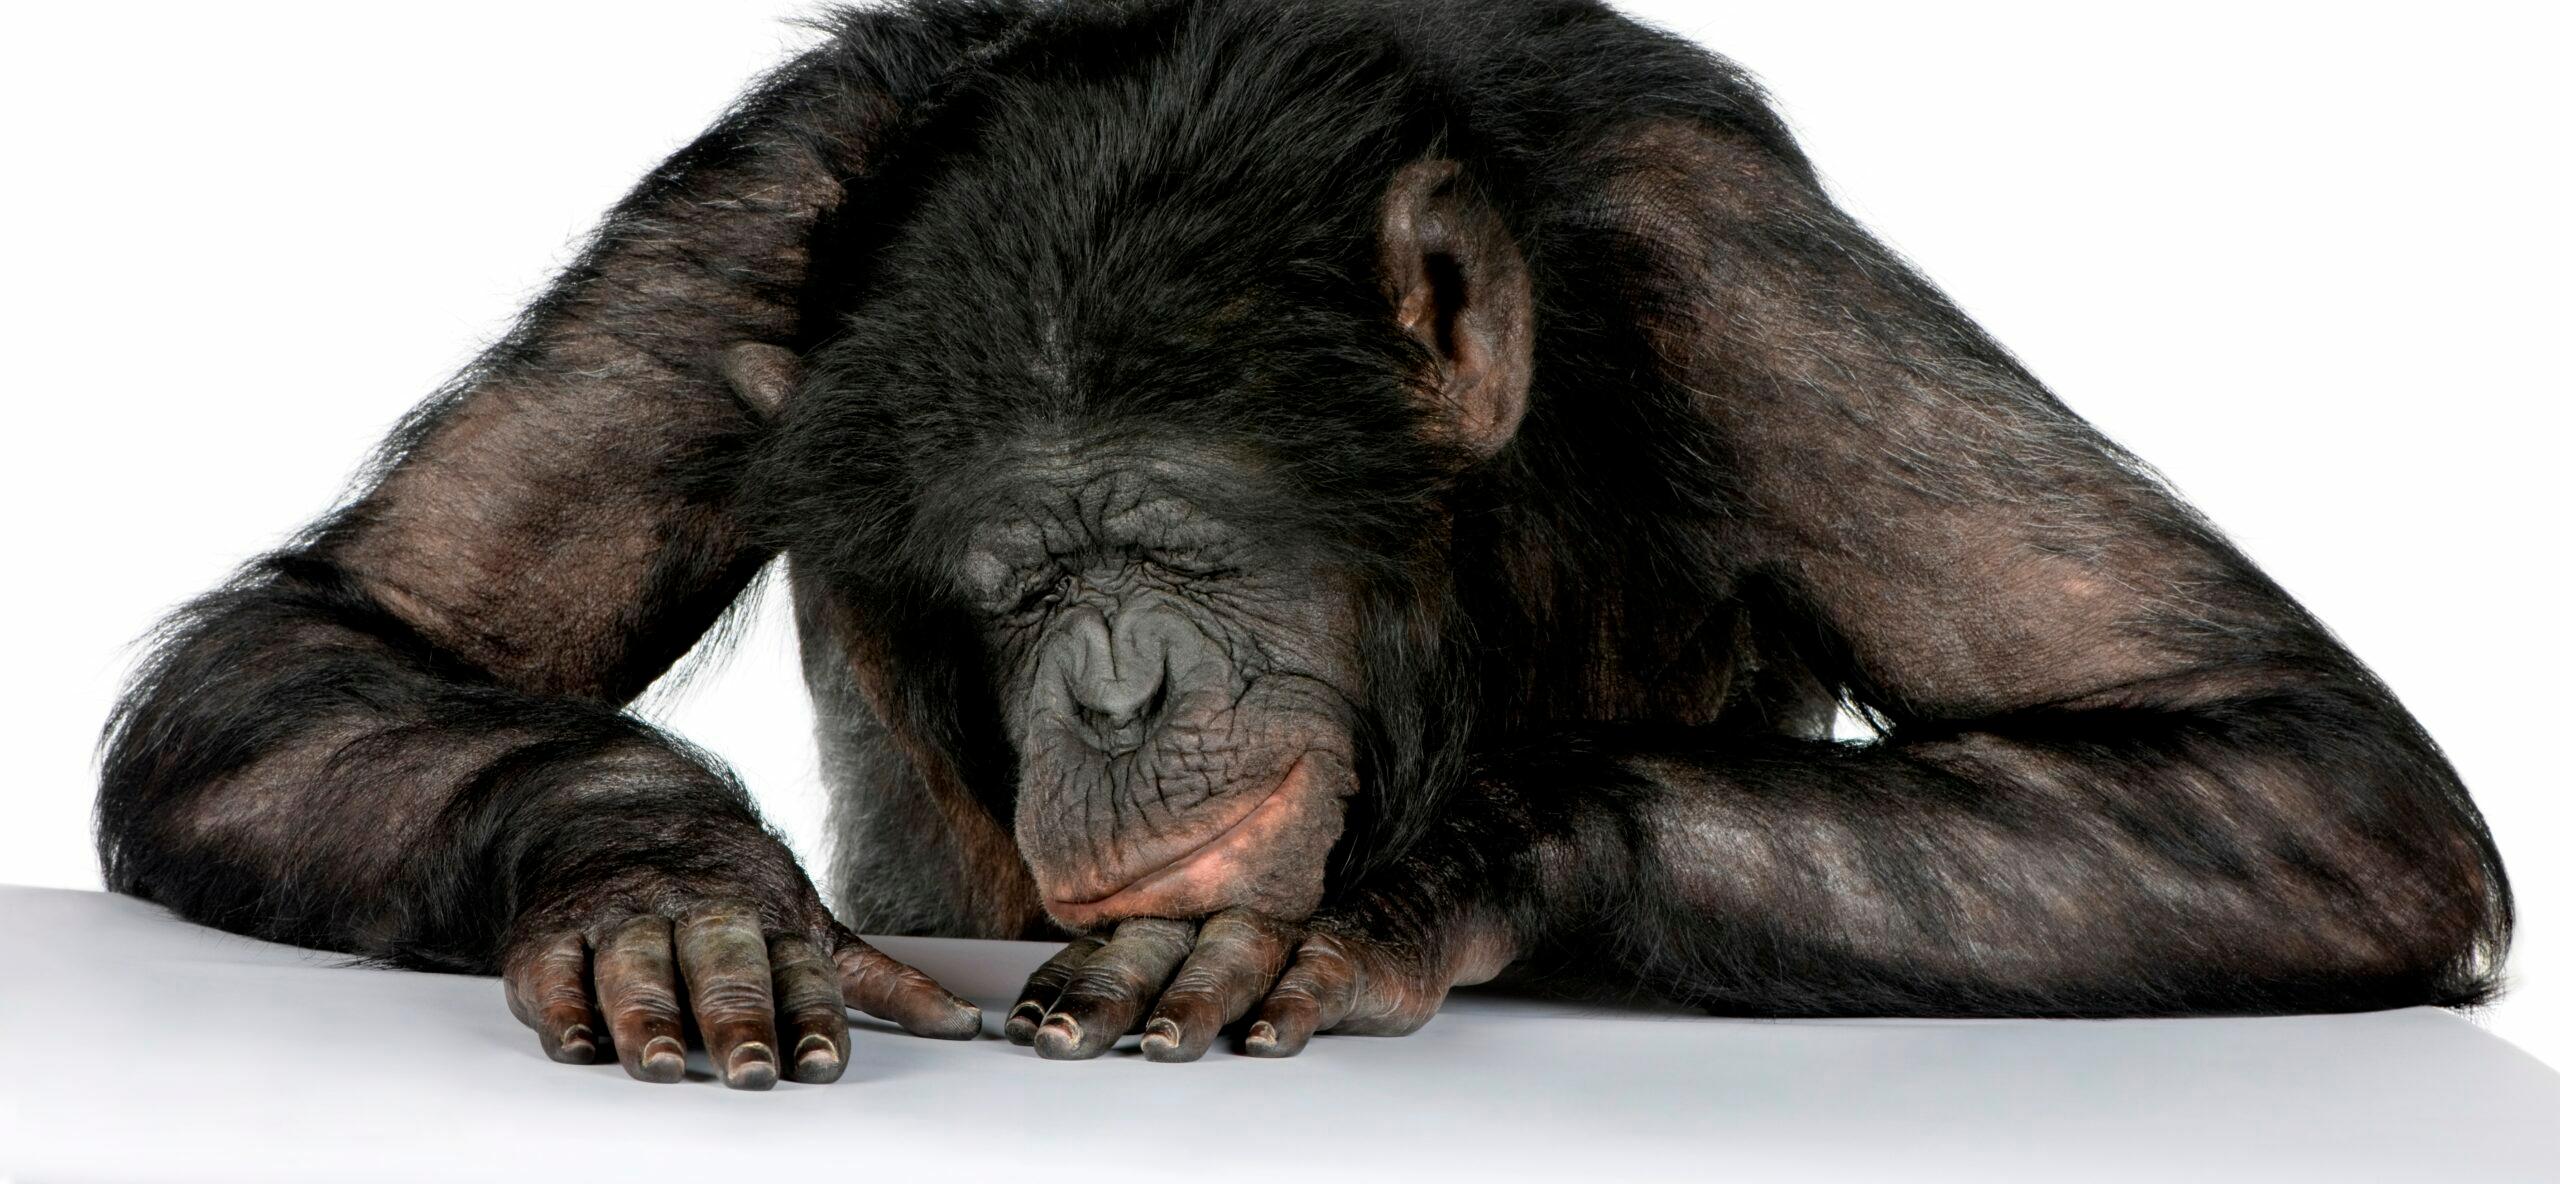 Typo Causes Trader To Sell Bored Ape NFT Worth $284,495 For Just $2,844